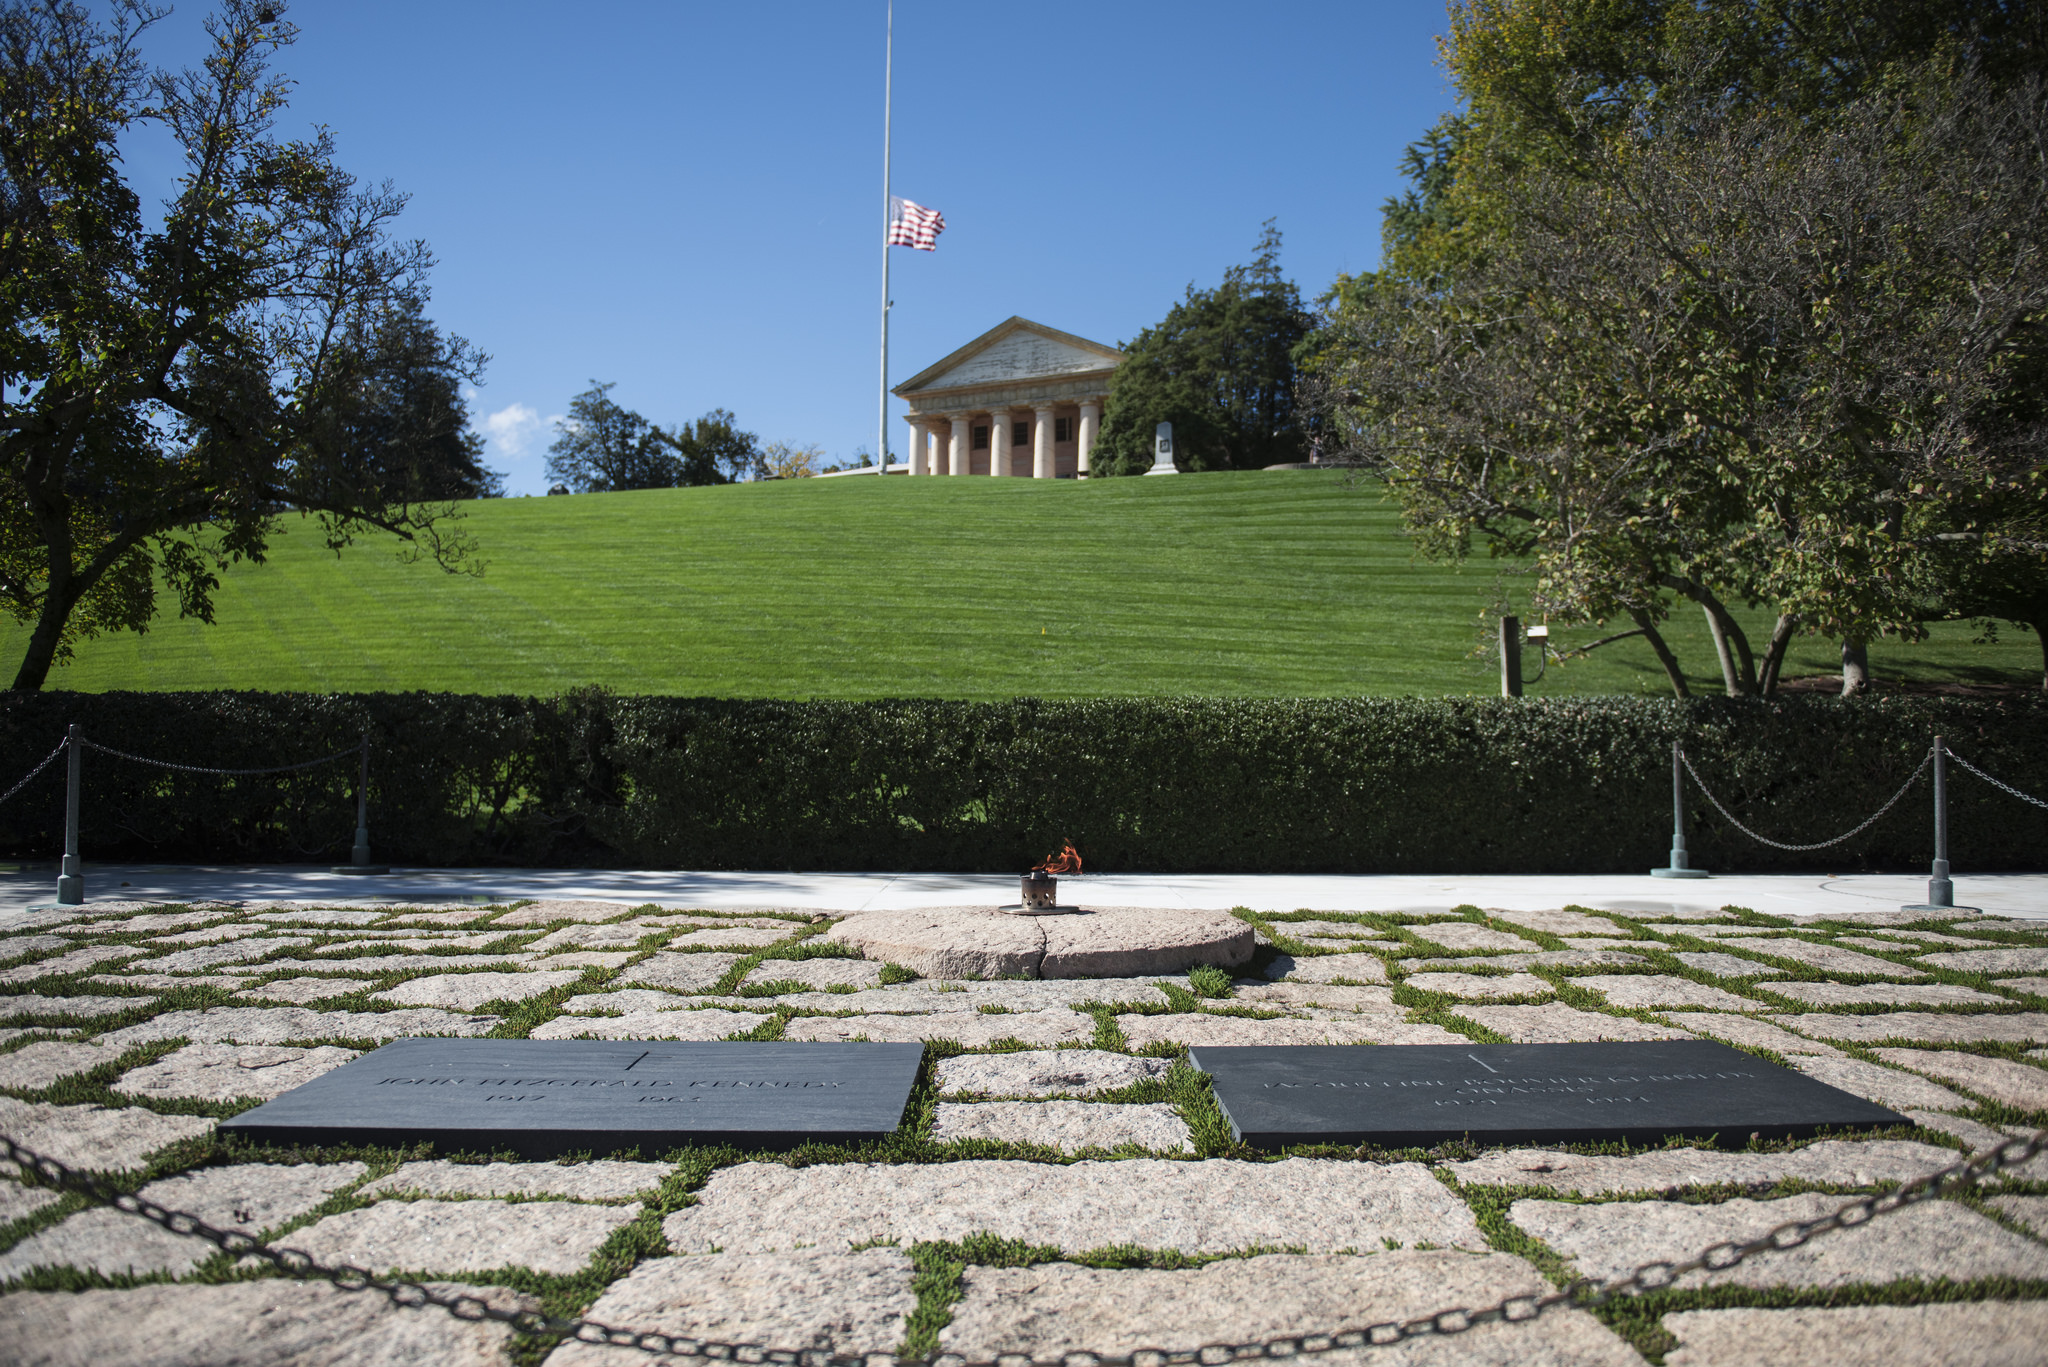 Per the ANC: During his visit to Arlington National Cemetery in 1963, President Kennedy had stood on the sloping hillside in front of Arlington House, which offers views of the Lincoln Memorial, Washington Monument and U.S. Capitol. "I could stay here forever," he told a park ranger. First Lady Jacqueline Kennedy wanted her husband's gravesite to be accessible to the American public…The chosen plot, on the hillside below Arlington House, is near where Kennedy had said he could stay "forever." 